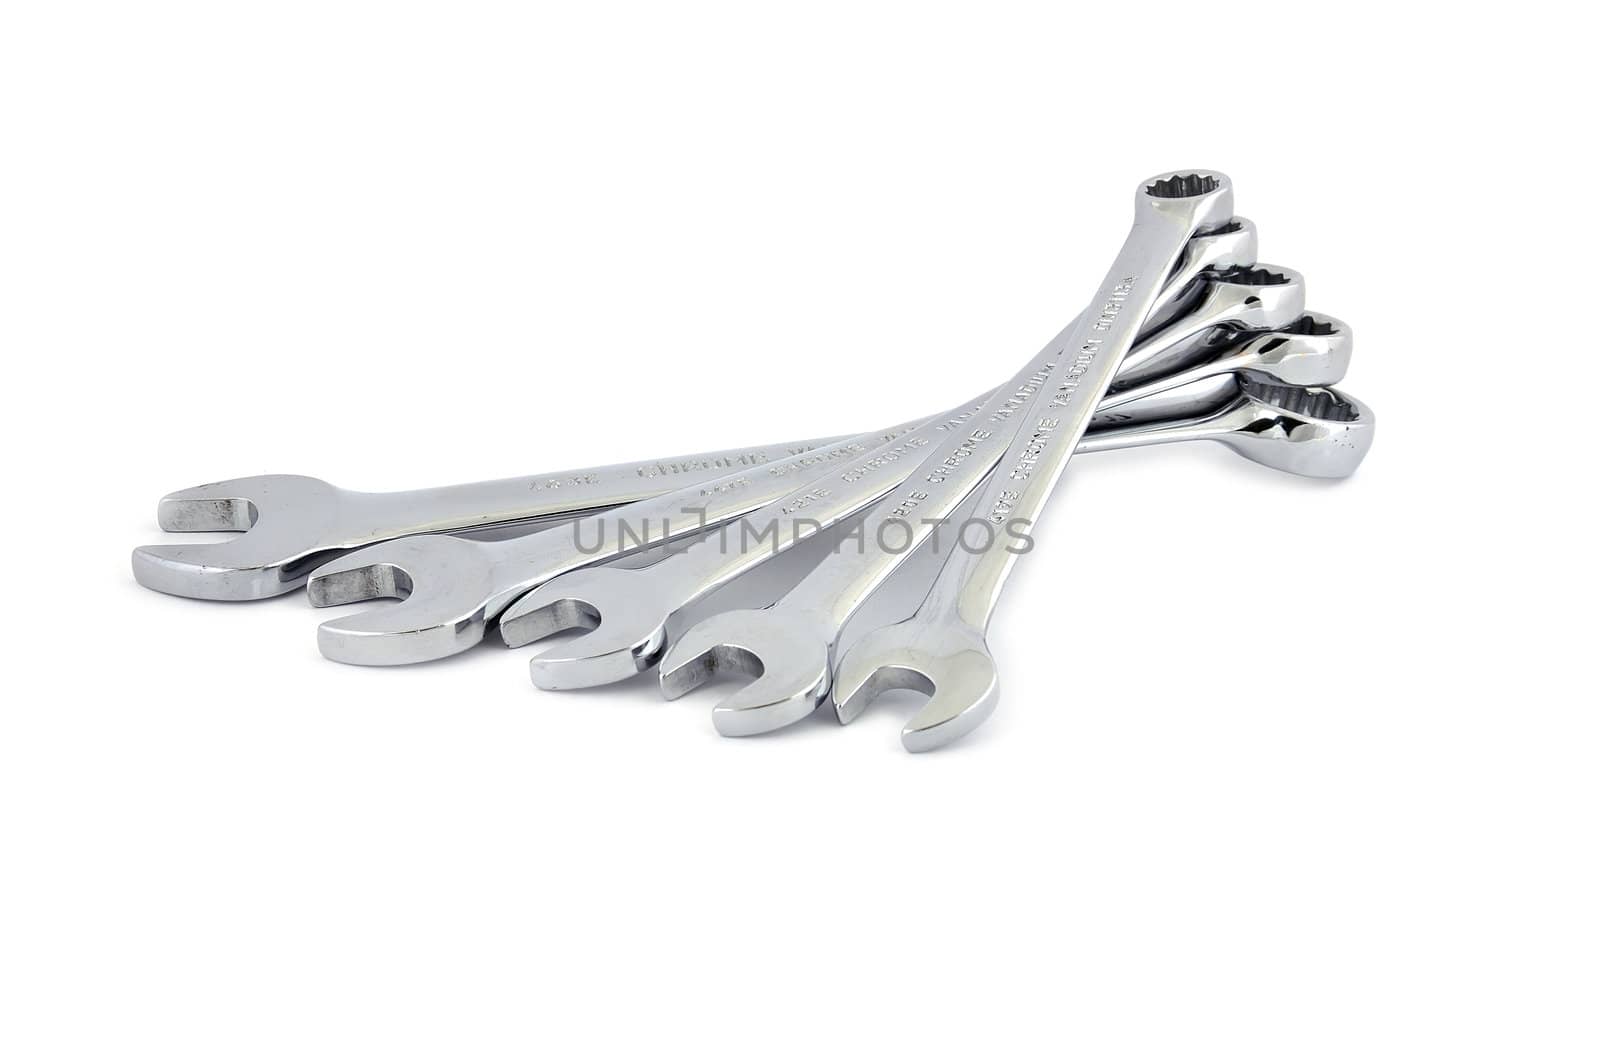 set of wrenches on white background